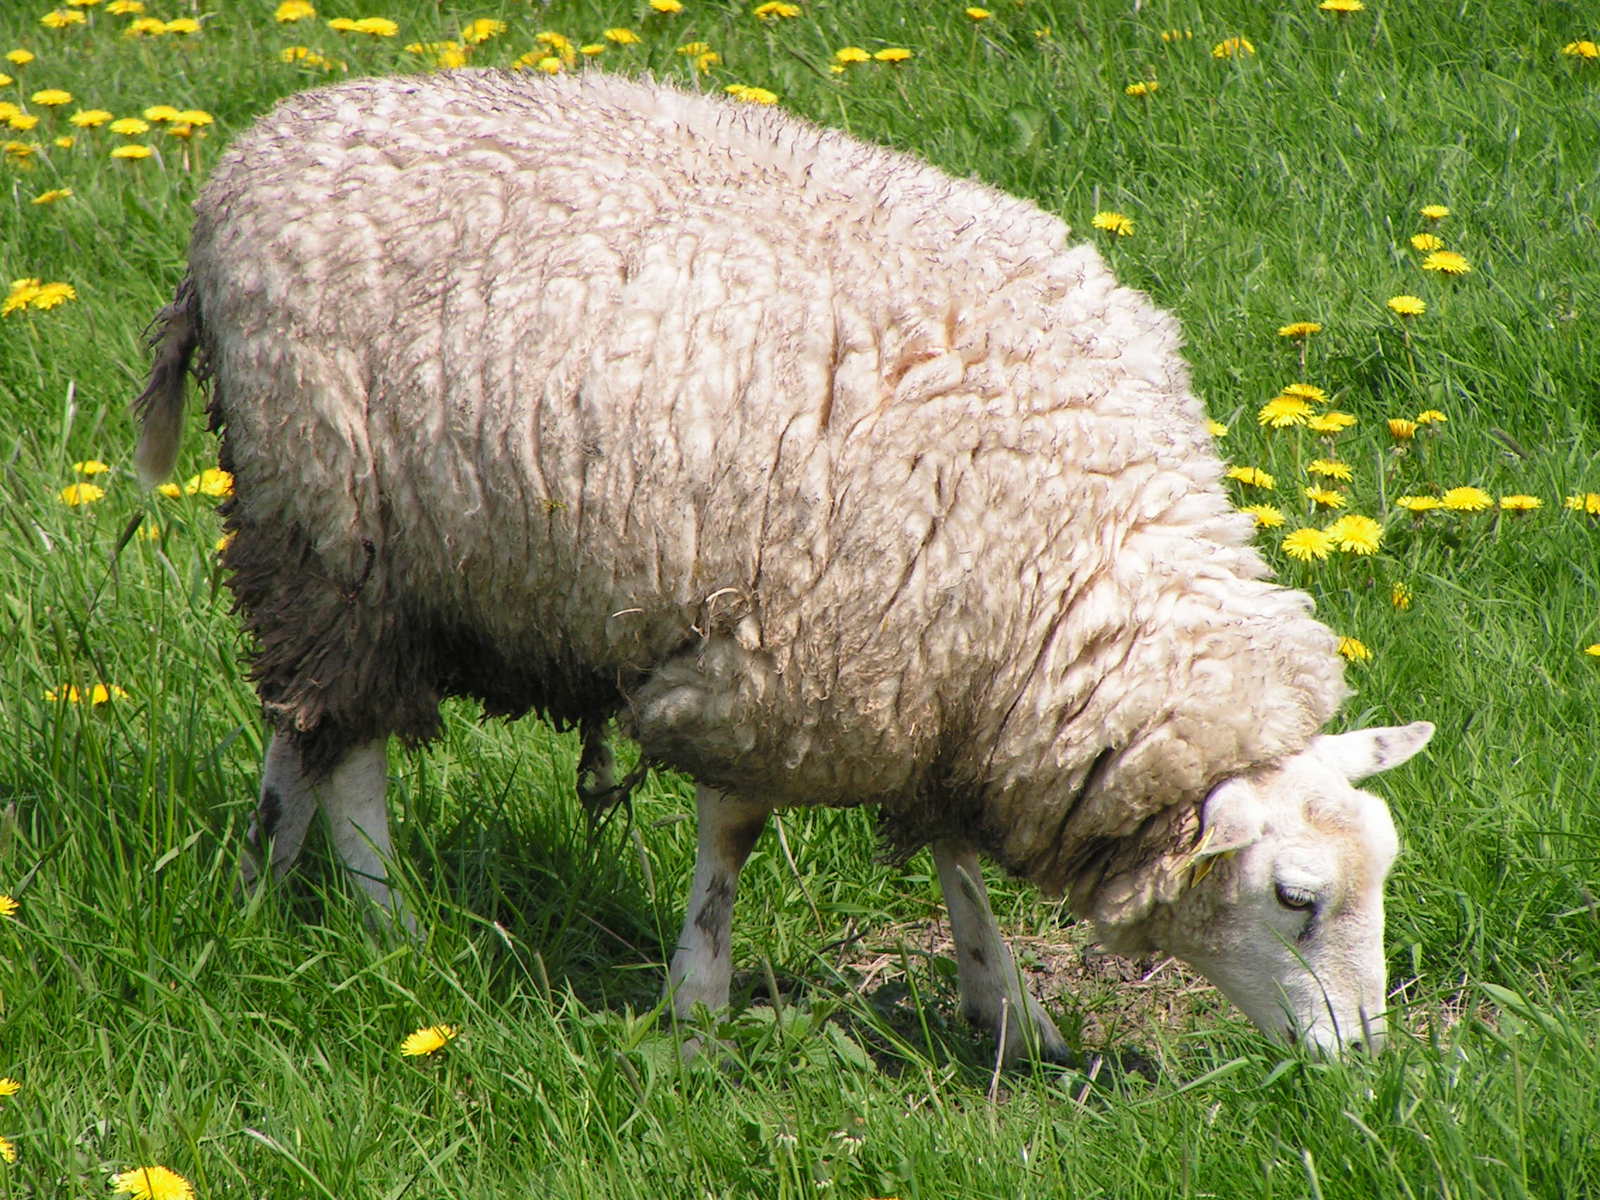 a sheep grazing in a field full of flowers